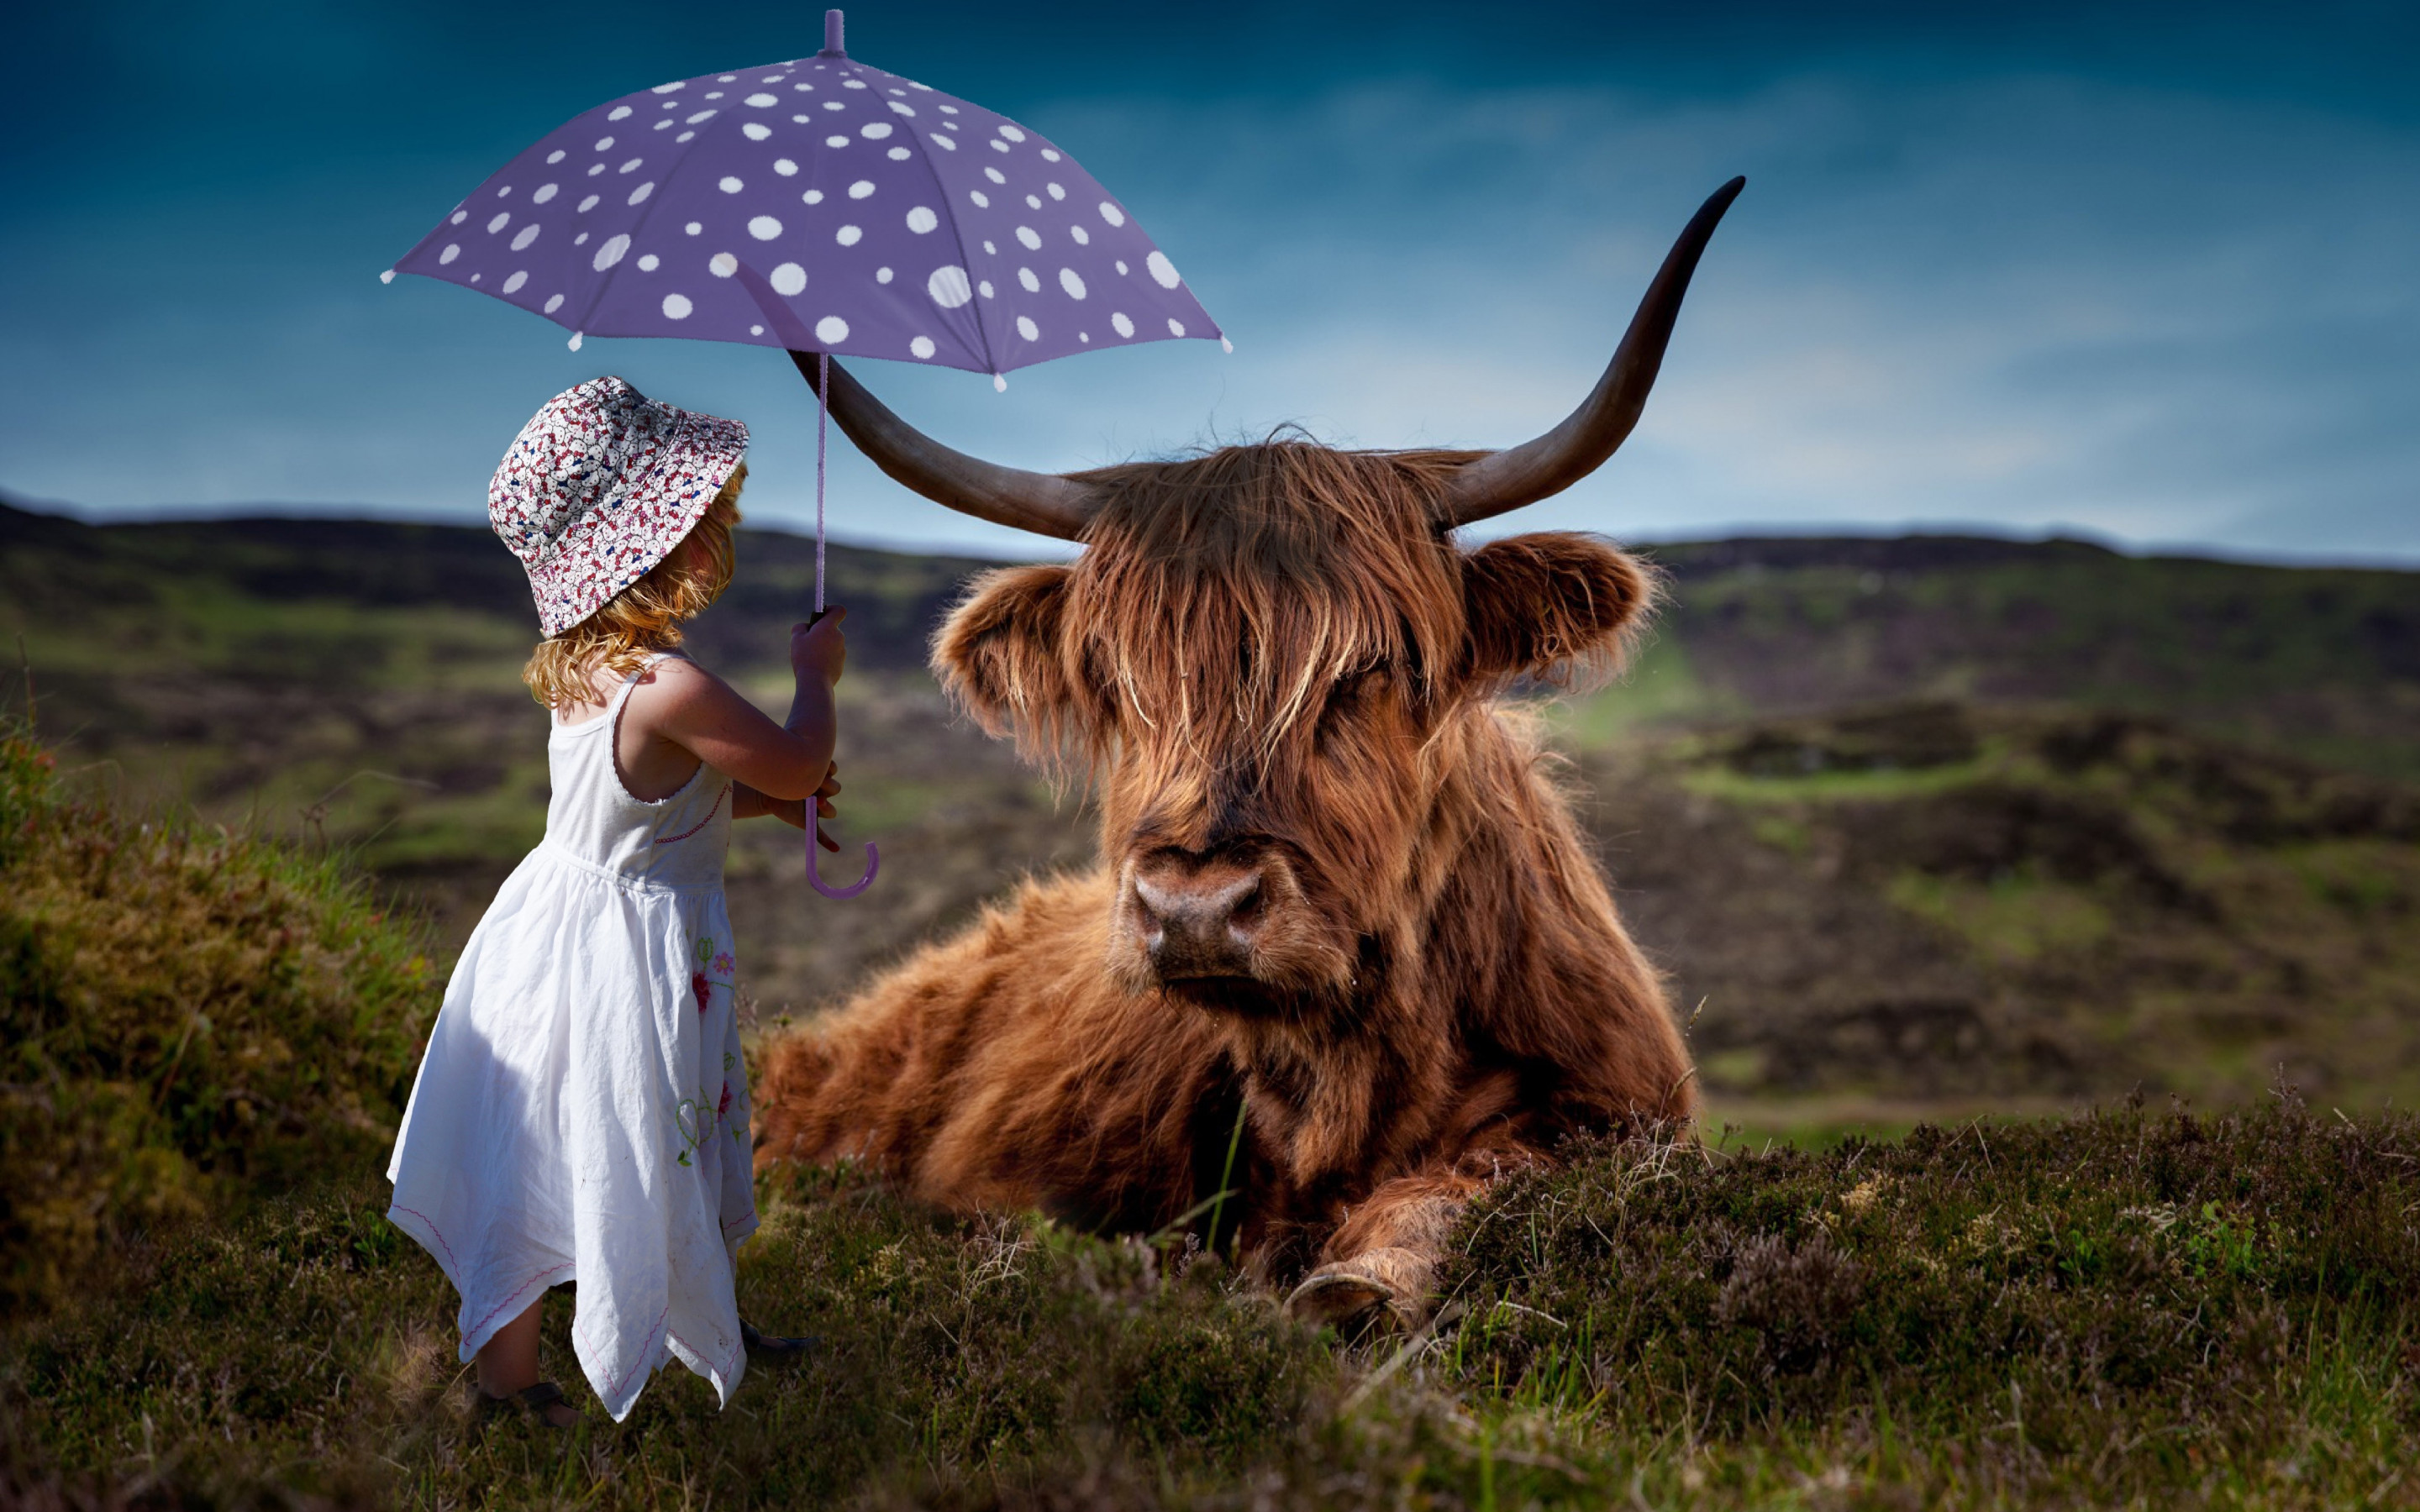 Child with the umbrella and the funny cow wallpaper 2880x1800